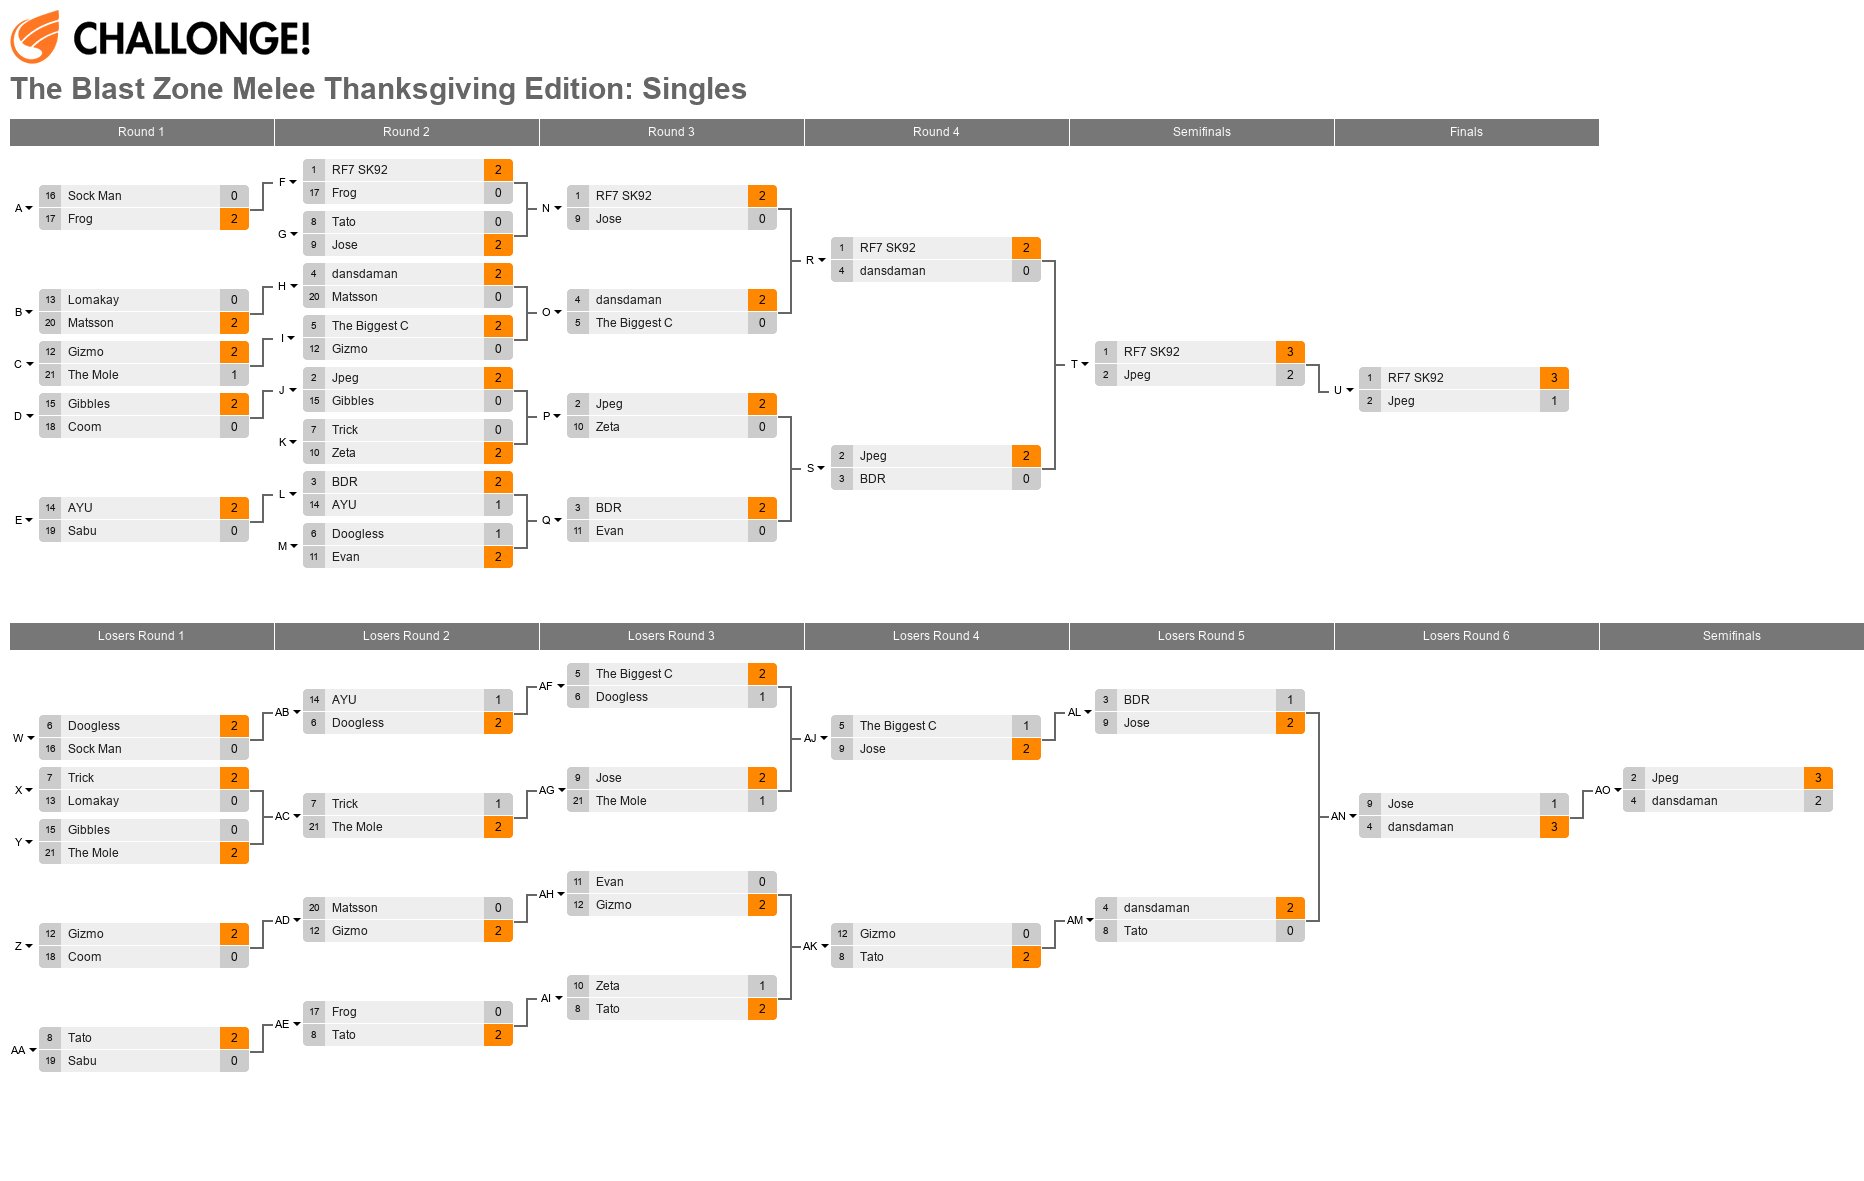 The Blast Zone Melee Thanksgiving Edition: Singles